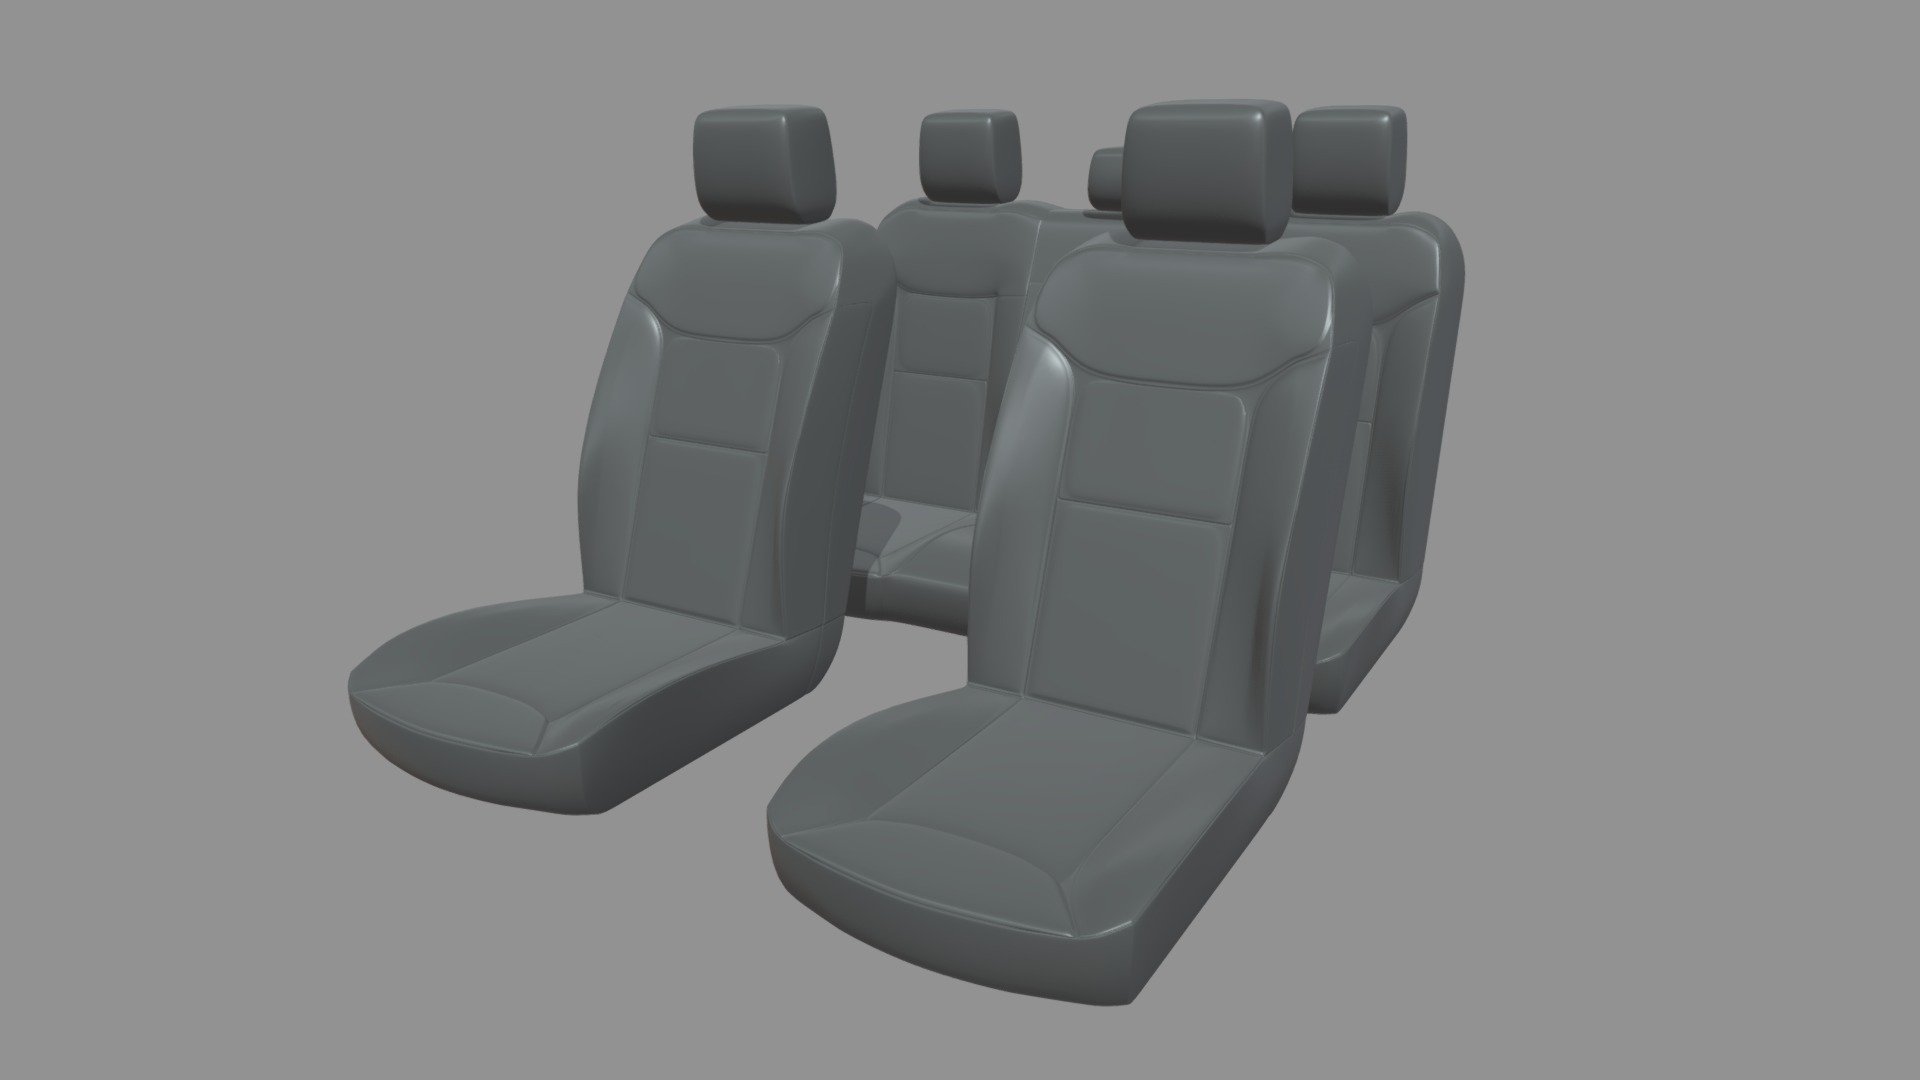 This model contains a car seat based on a real stylized Car Seat 014 from an sport car which i modeled in Maya 2018. This model is perfect to create a new great scene with different car pieces or part of a car model. I got a lot of different Car Seats and Car Parts on my profile.

The model is ready as one unique part and ready for being a great CGI model and also a 3D printable model, i will add the STL model, tested for 3D printing in Ultimaker Cura. I uploaded the model in .mb, ,blend, .stl, .obj and .fbx. If you need any other file tell me.

If you need any kind of help contact me, i will help you with everything i can. If you like the model please give me some feedback, I would appreciate it.

Don’t doubt on contacting me, i would be very happy to help. If you experience any kind of difficulties, be sure to contact me and i will help you. Sincerely Yours, ViperJr3D - Car Seat 014 - Buy Royalty Free 3D model by ViperJr3D 3d model